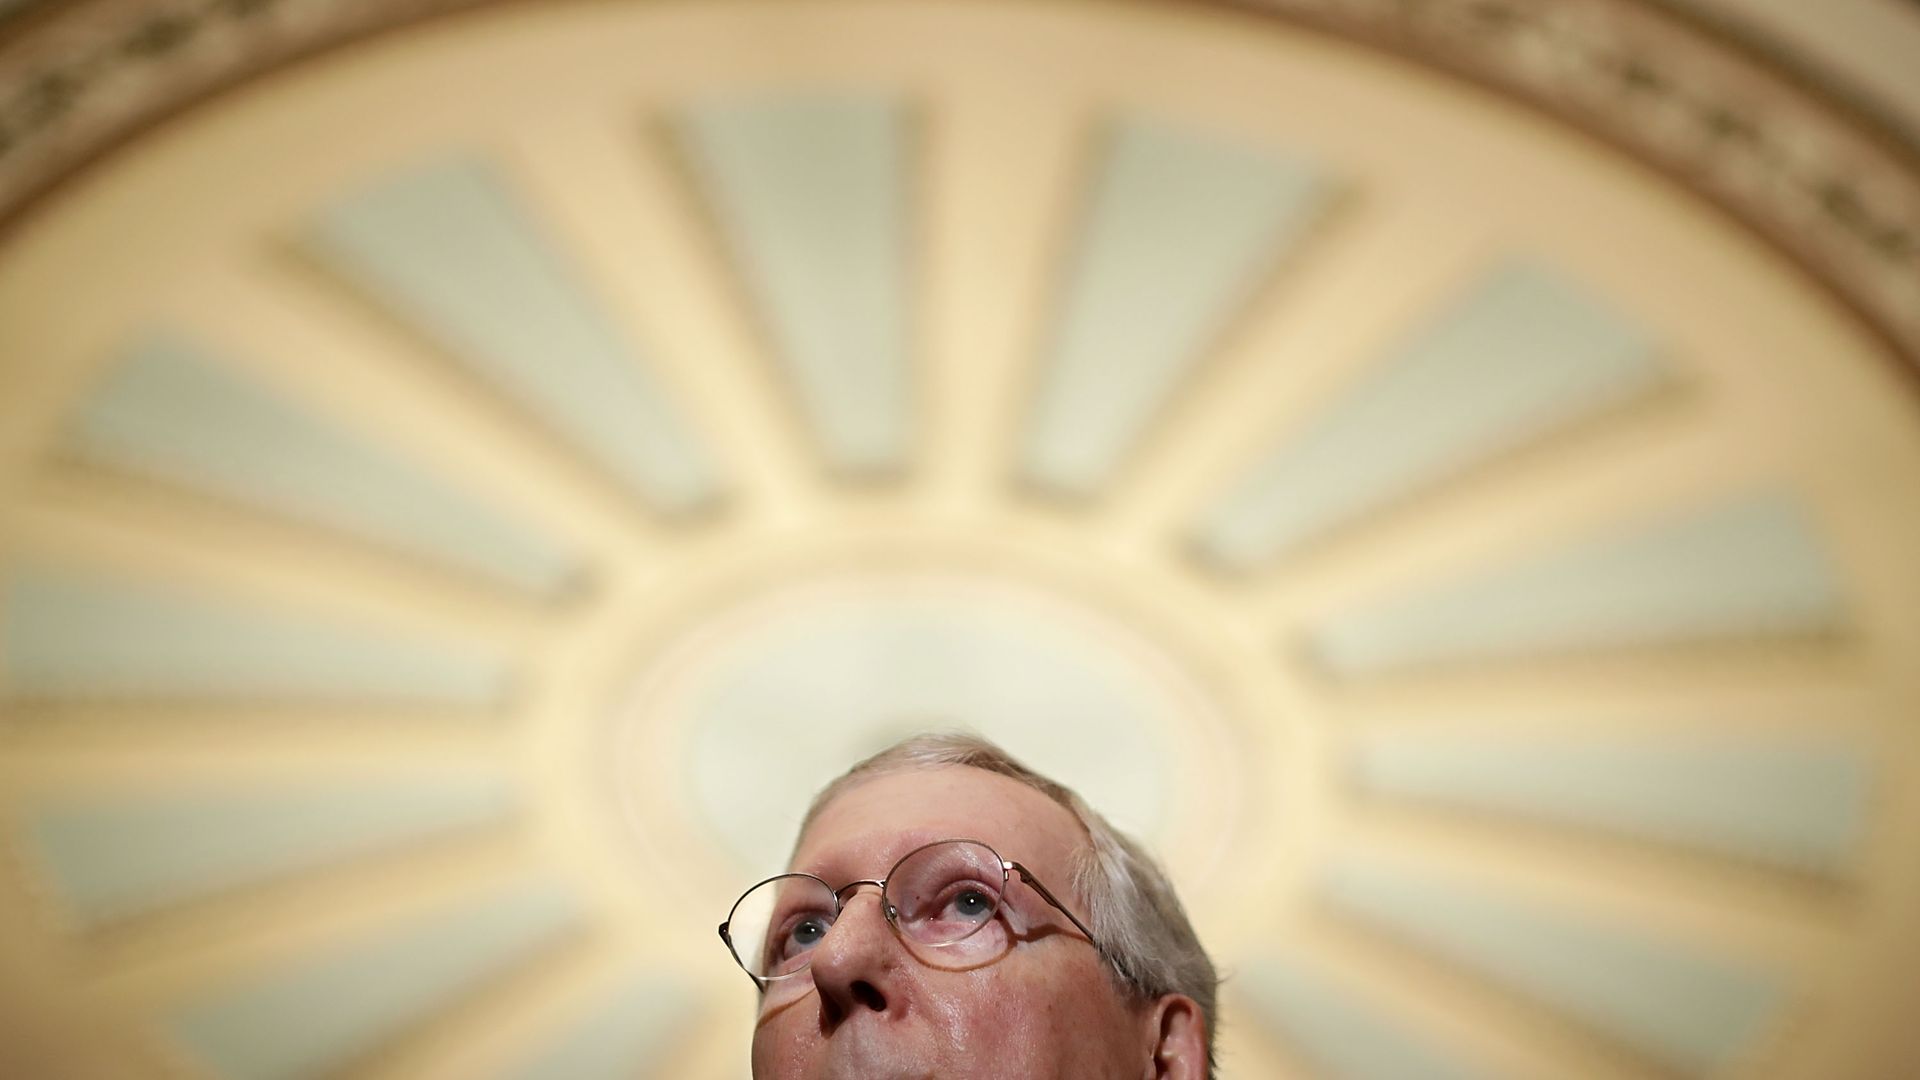 Mitch McConnell's face from a below-the-chin level shot